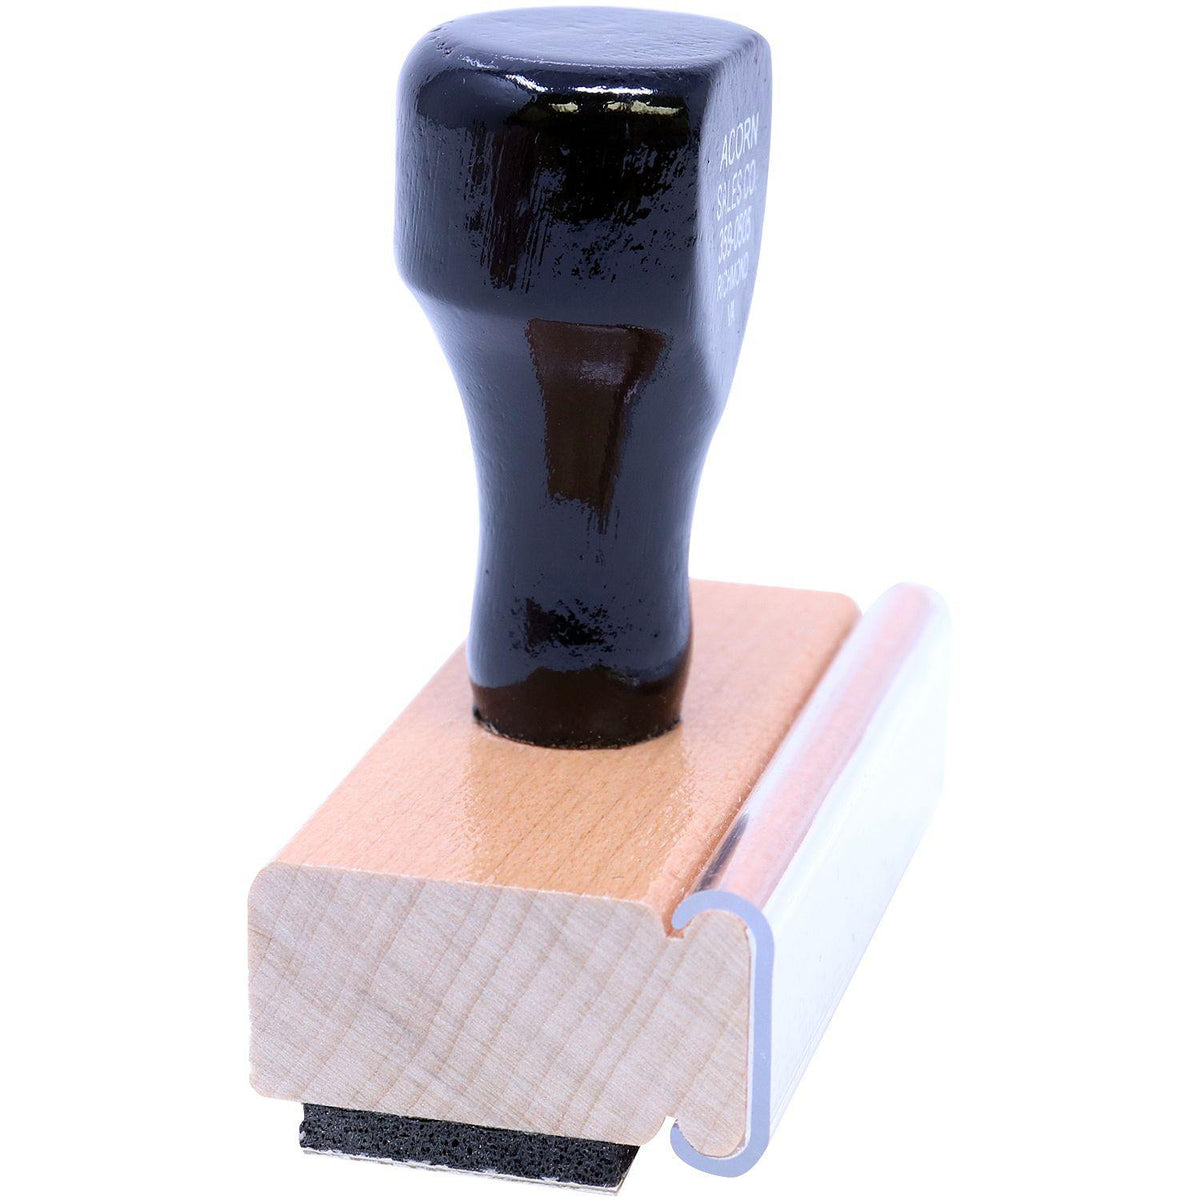 Side View of Workers Comp Rubber Stamp at an Angle